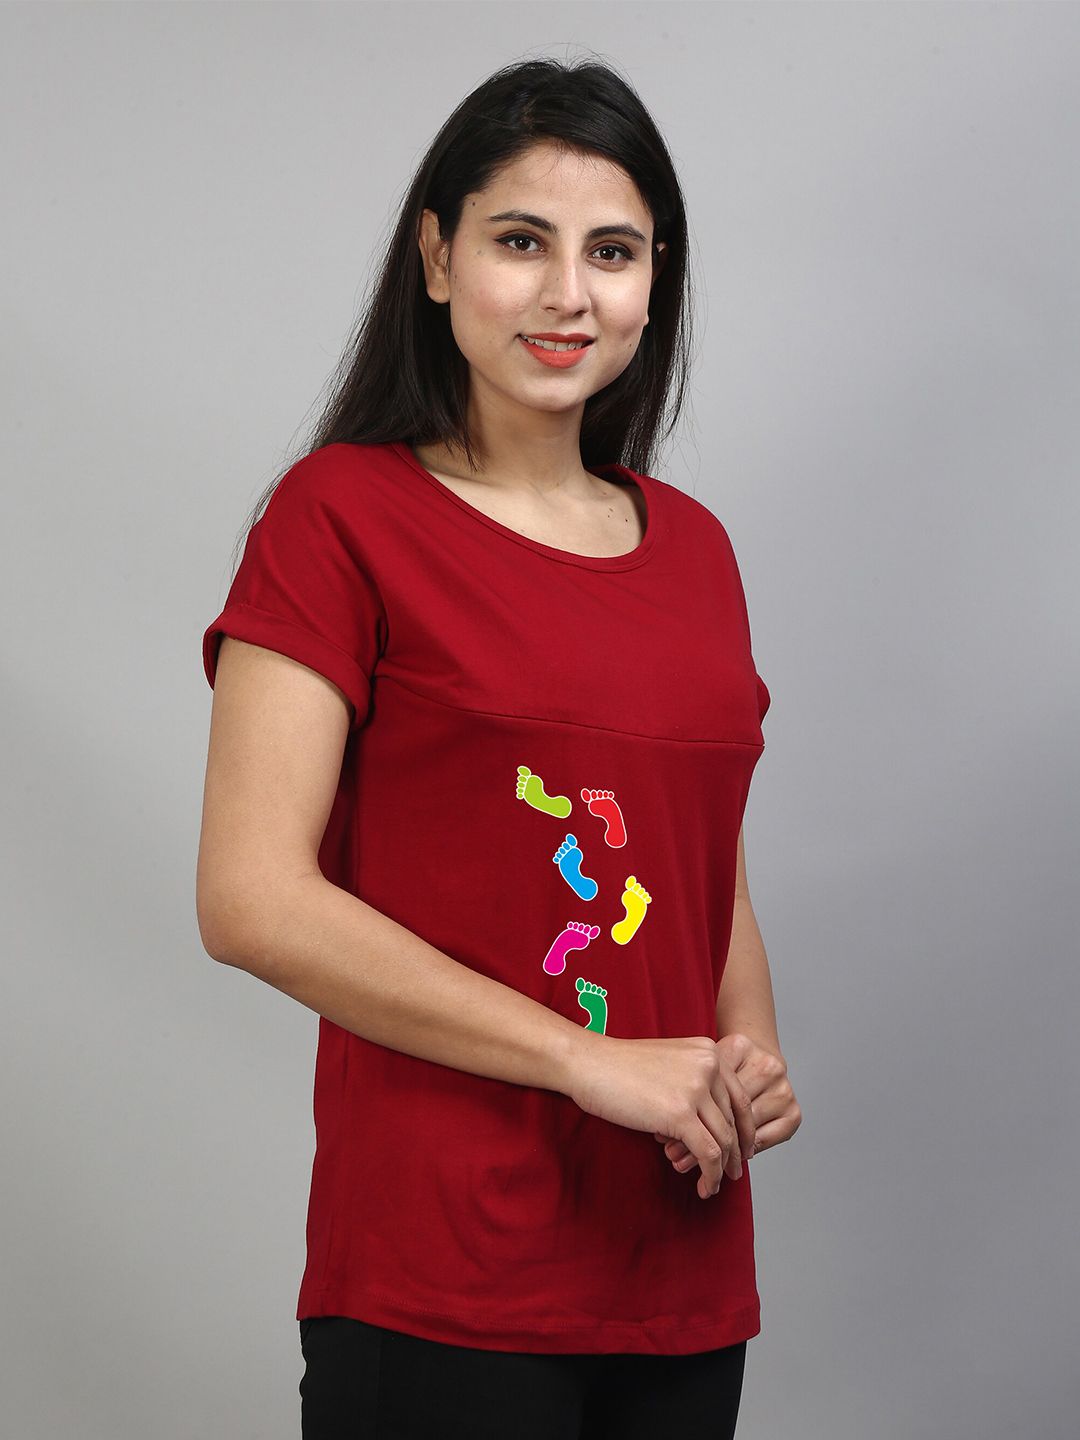 SillyBoom Graphic Printed Maternity T-shirt Price in India